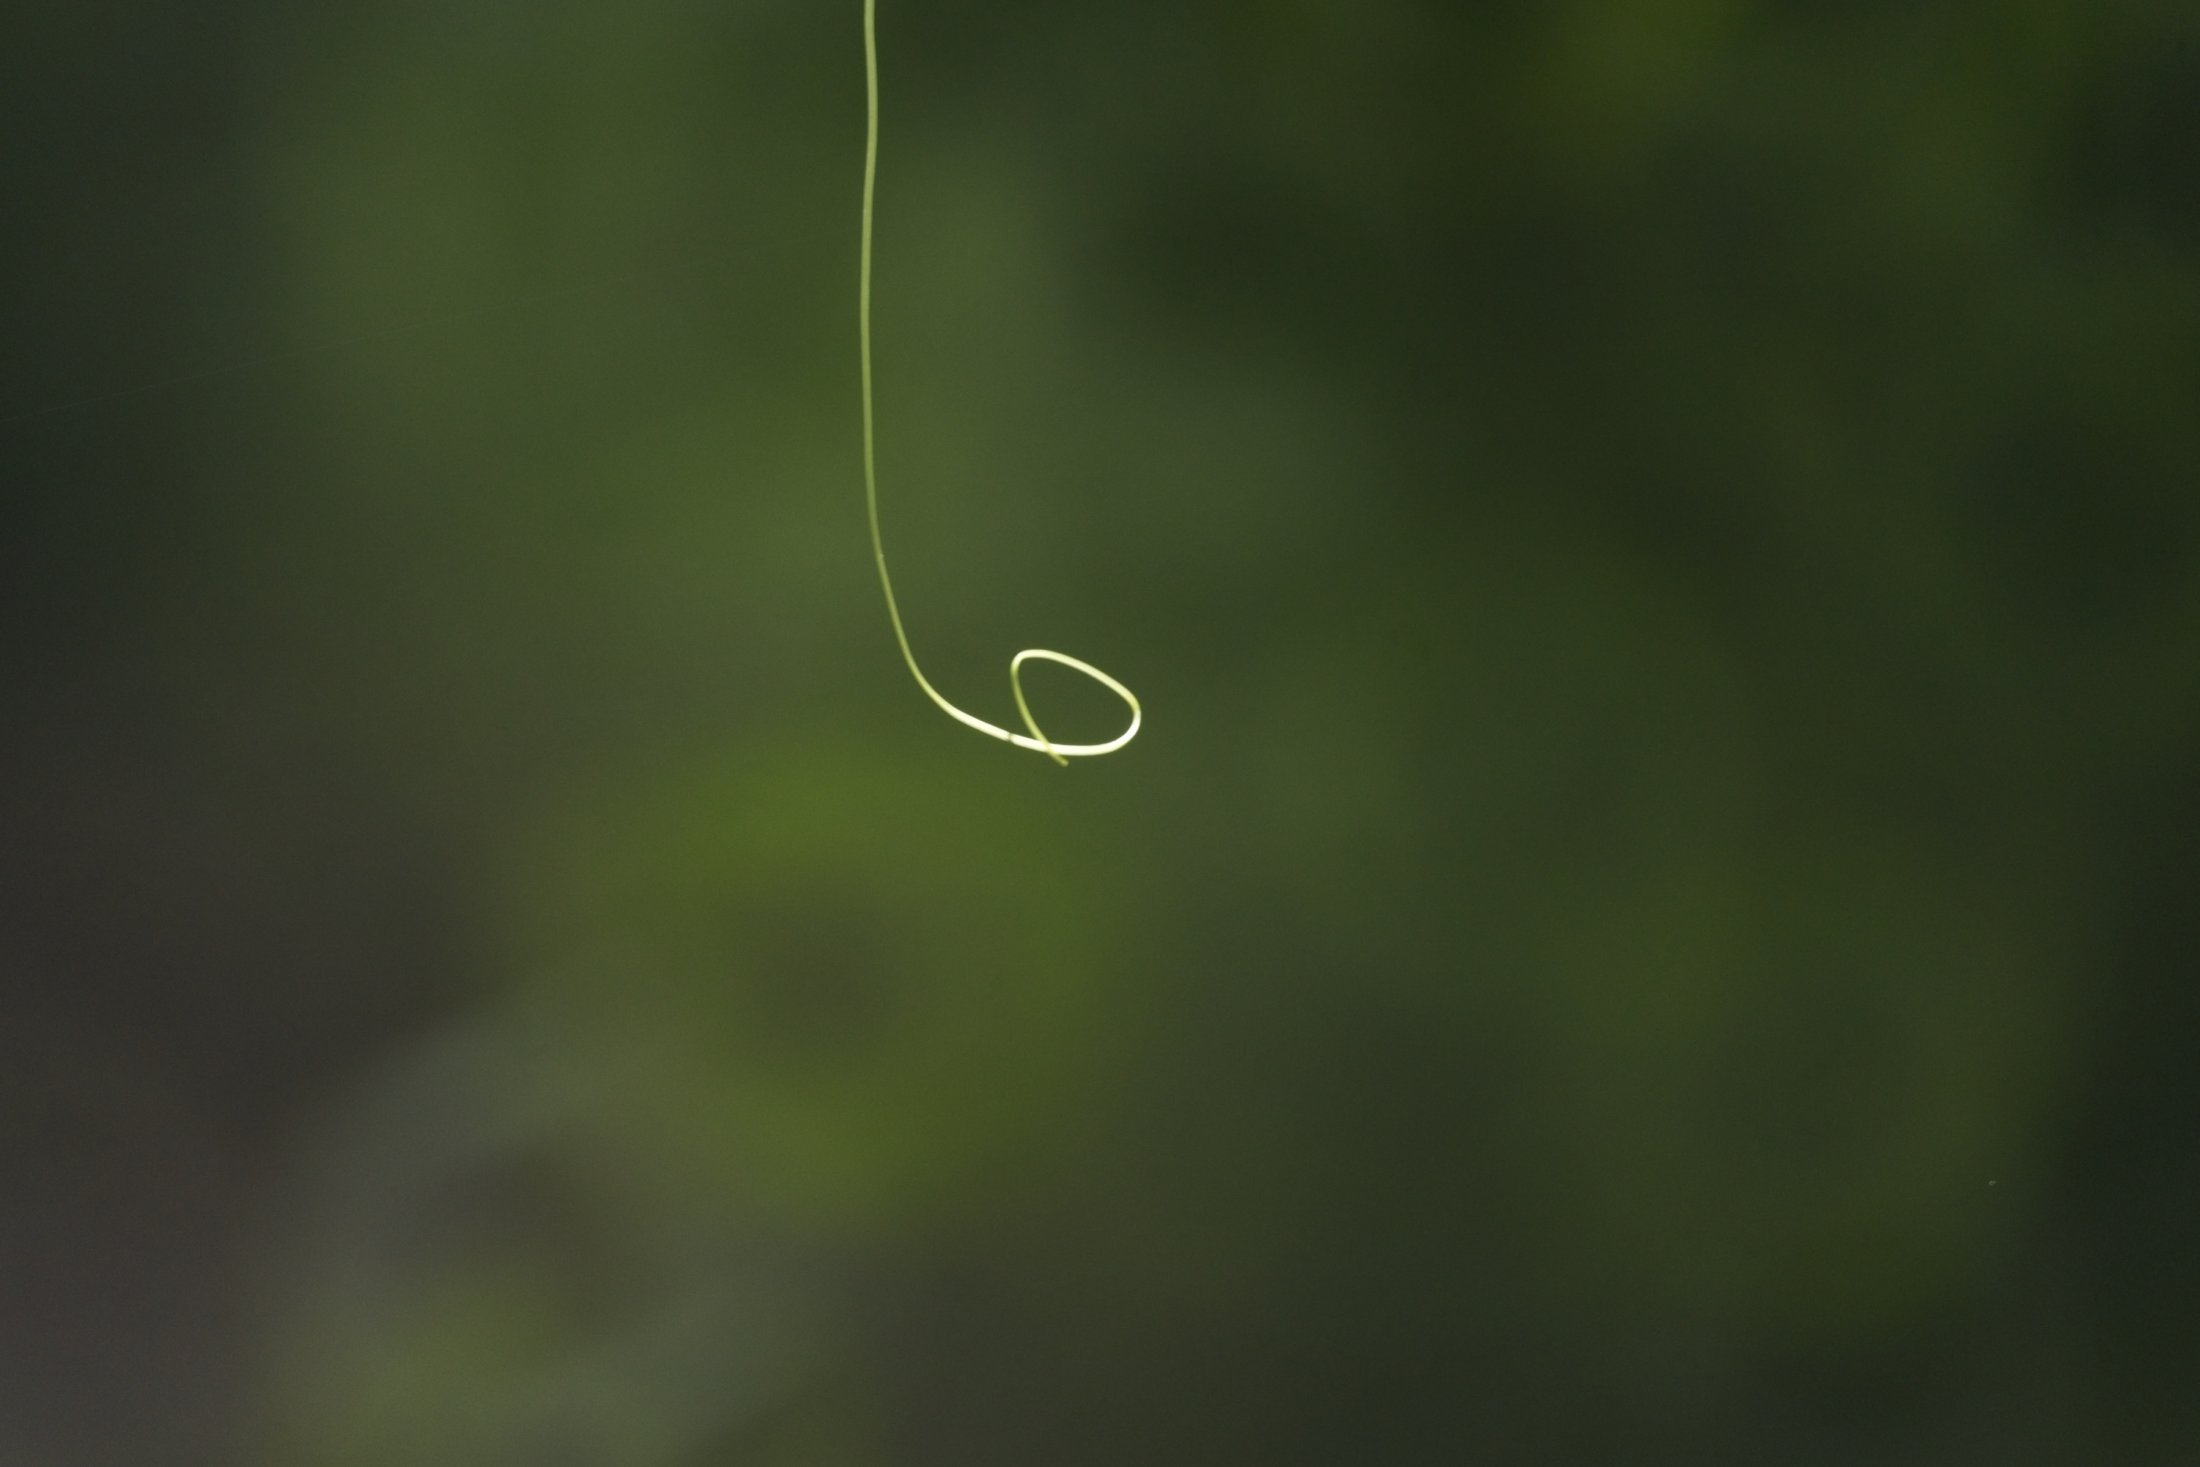 Creeper tendril, starting to coil